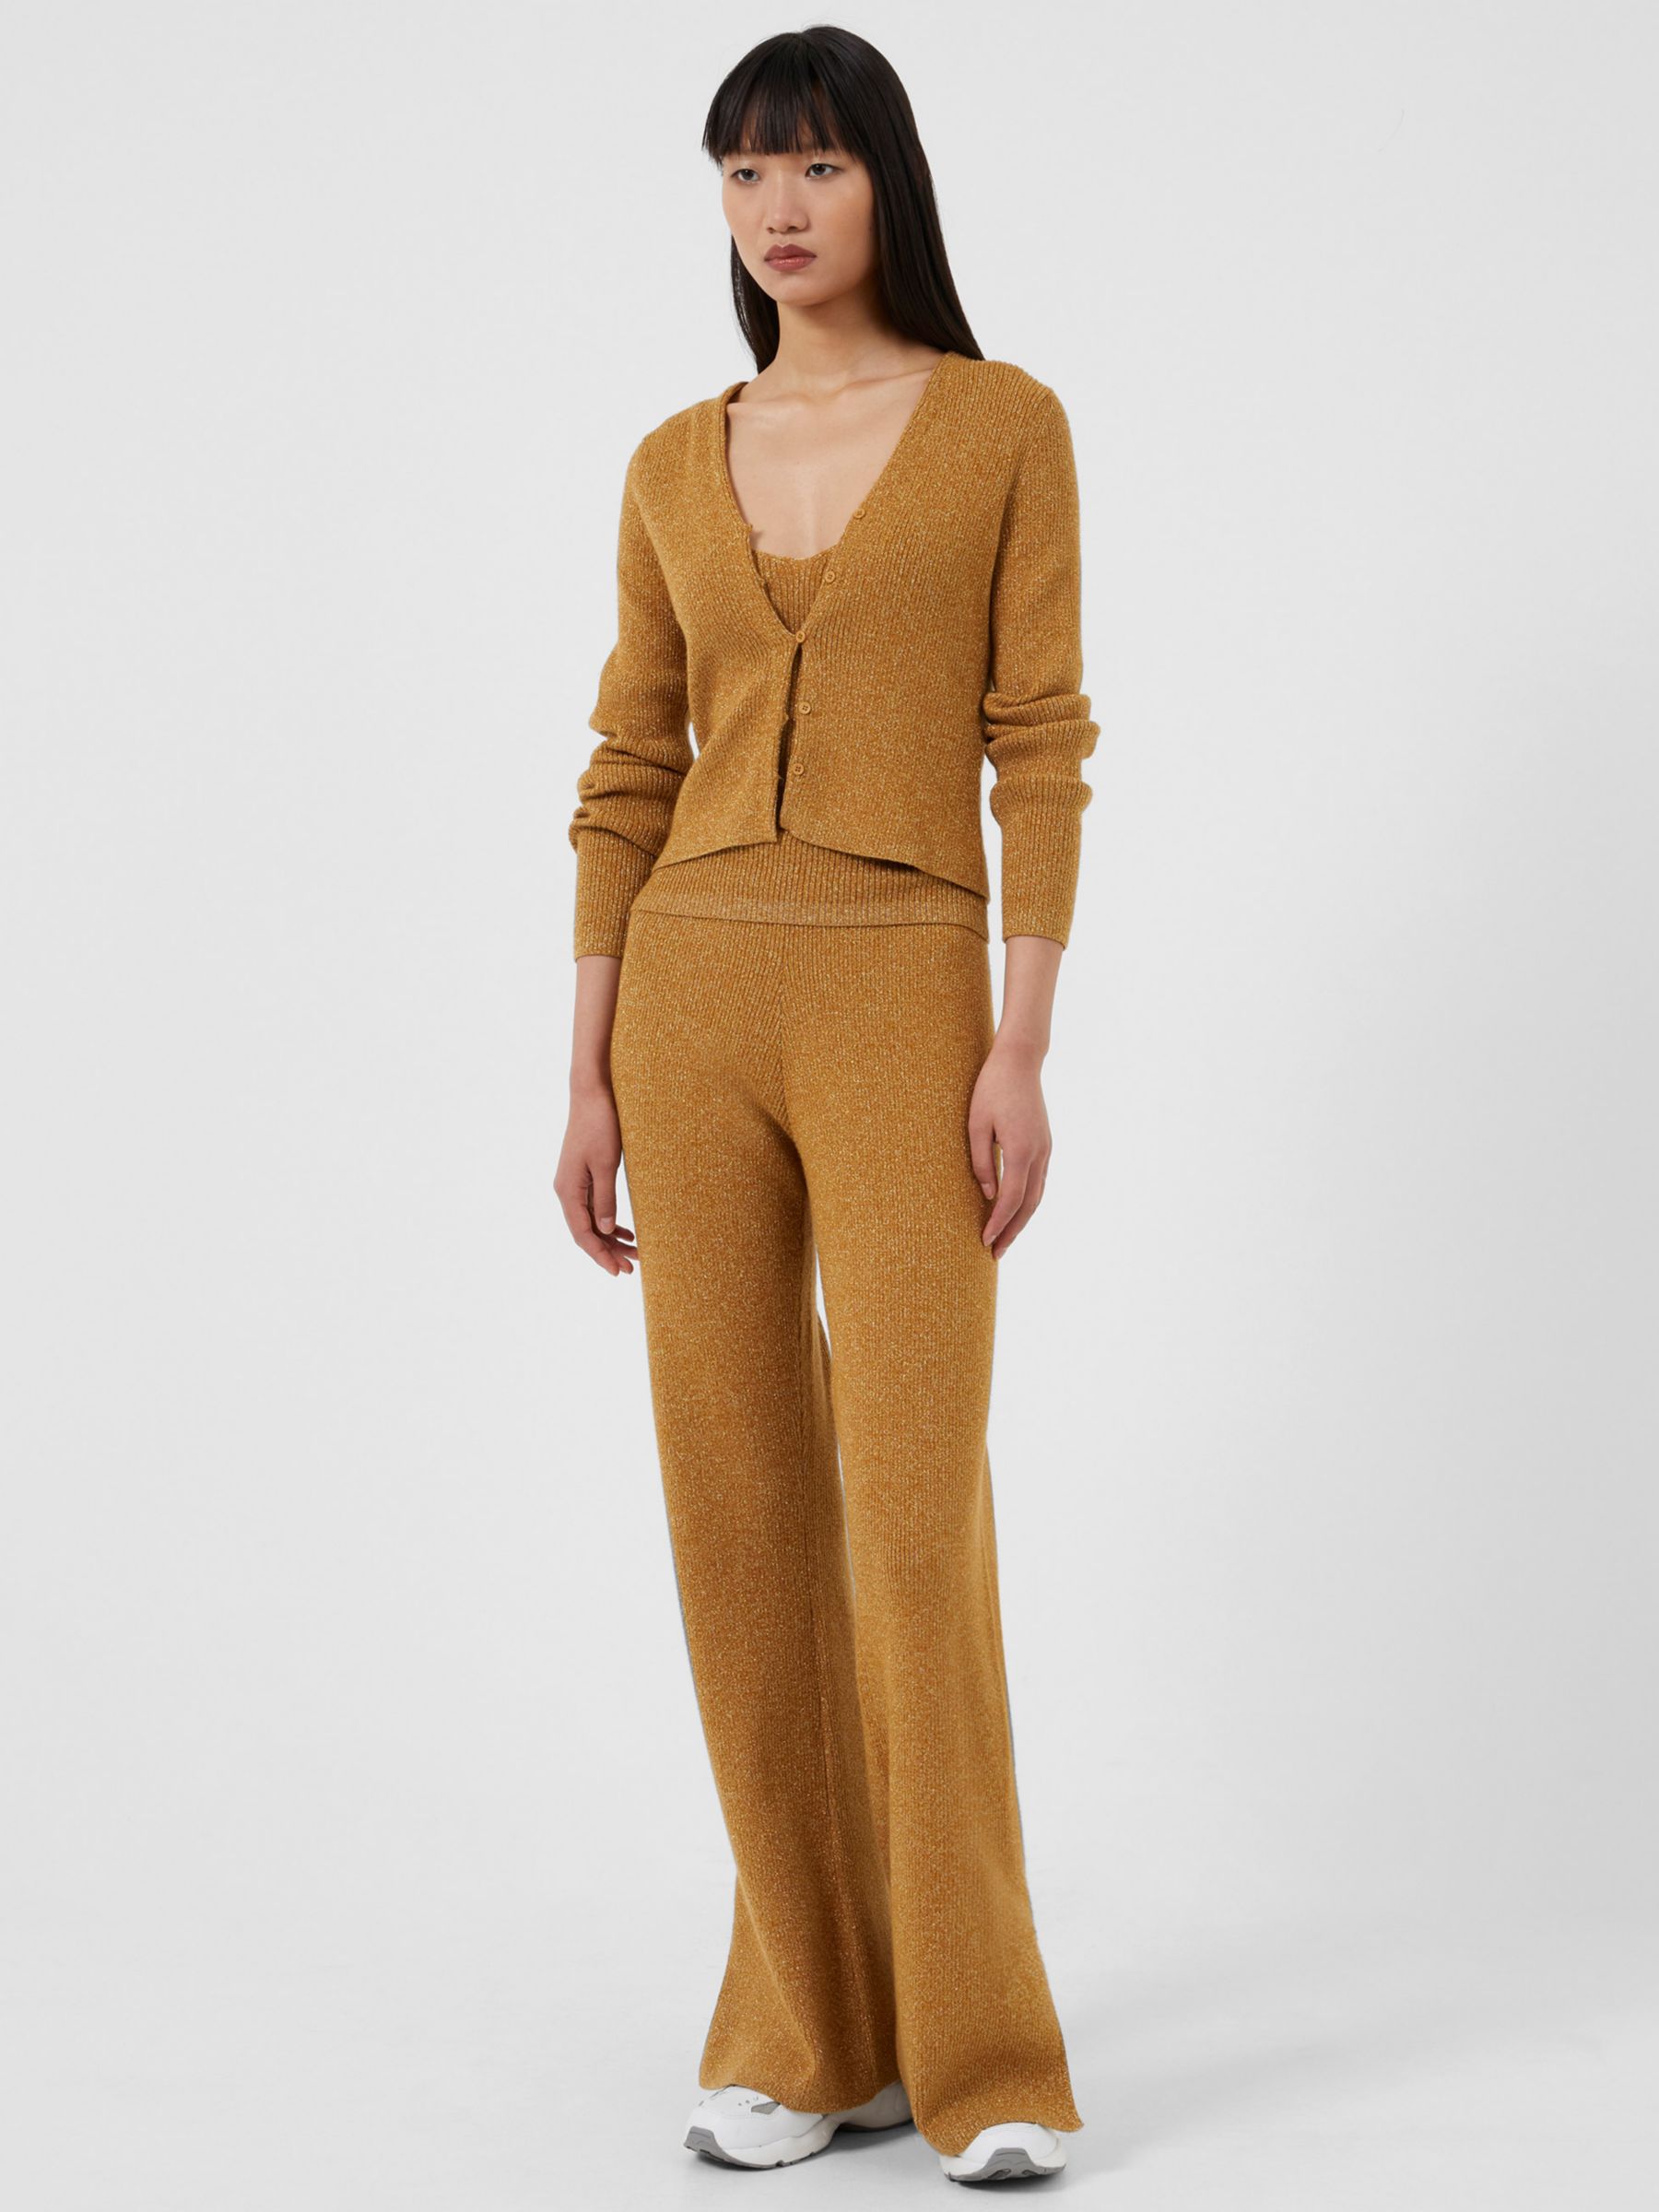 French Connection Nella Metallic Thread Knit Ribbed Trousers, Gold/Brown, XS